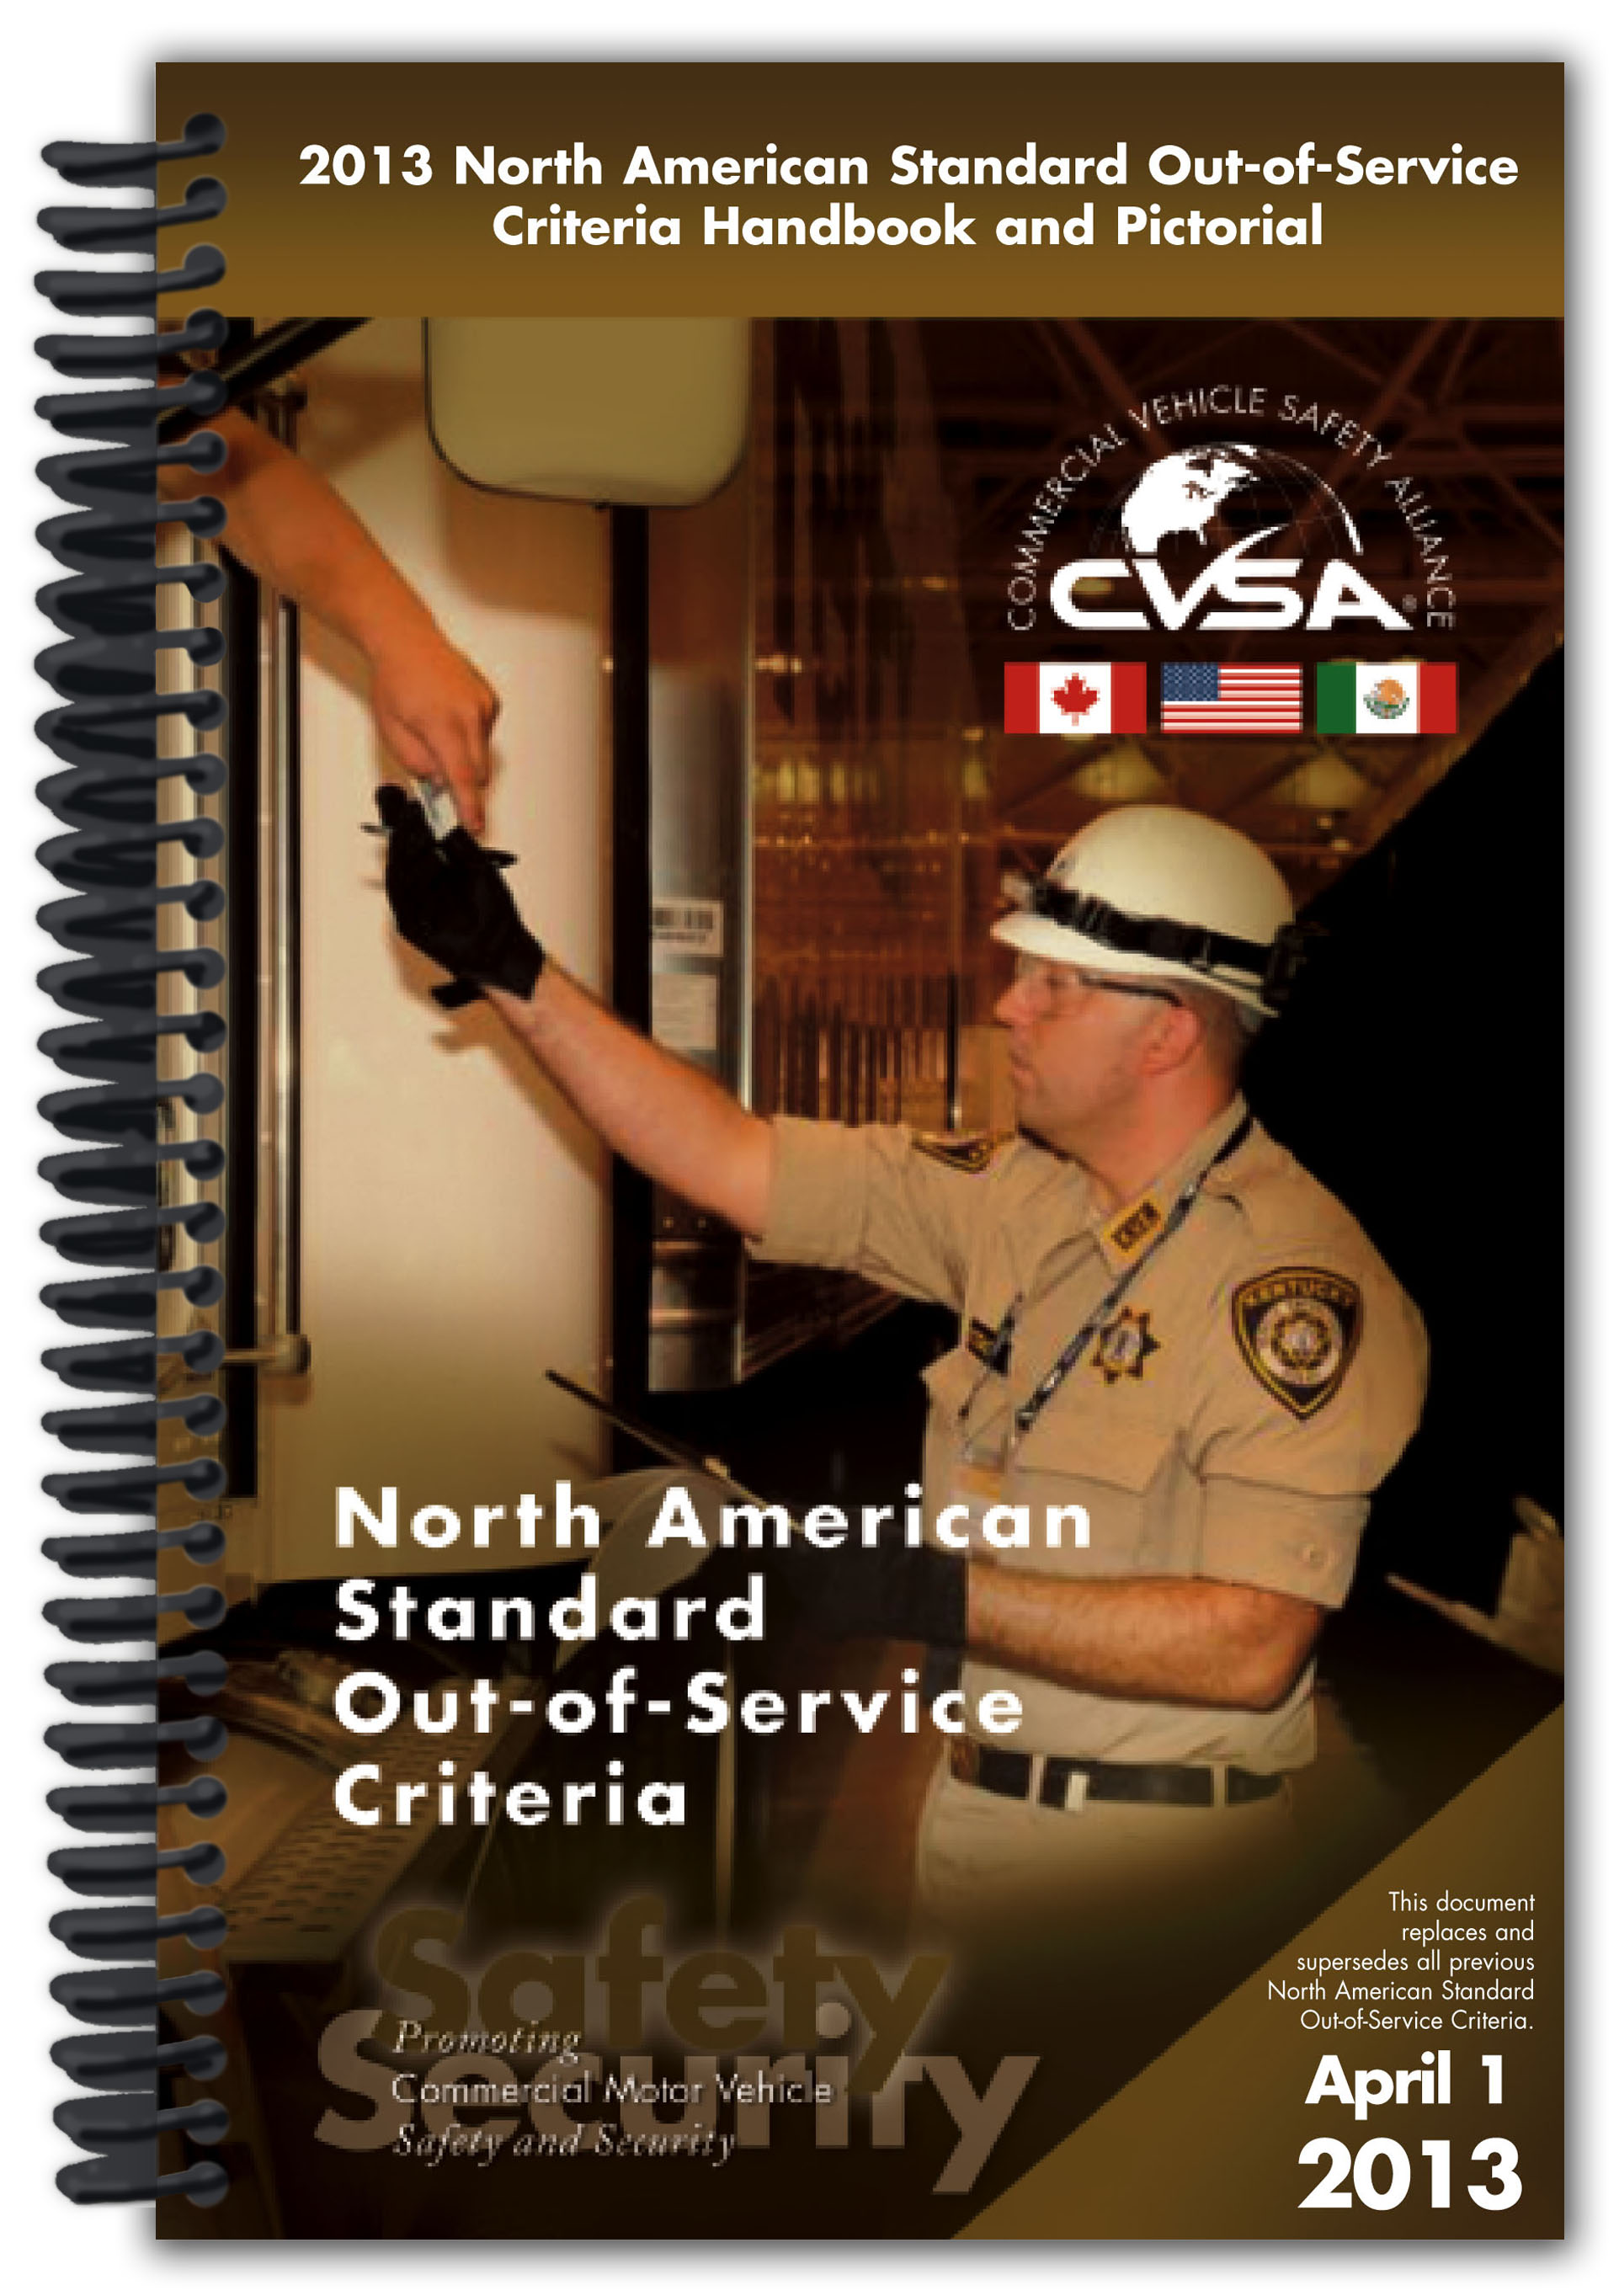 CVSA Releases 2013 North American Standard OutofService Criteria; Resource Outlines Benefits